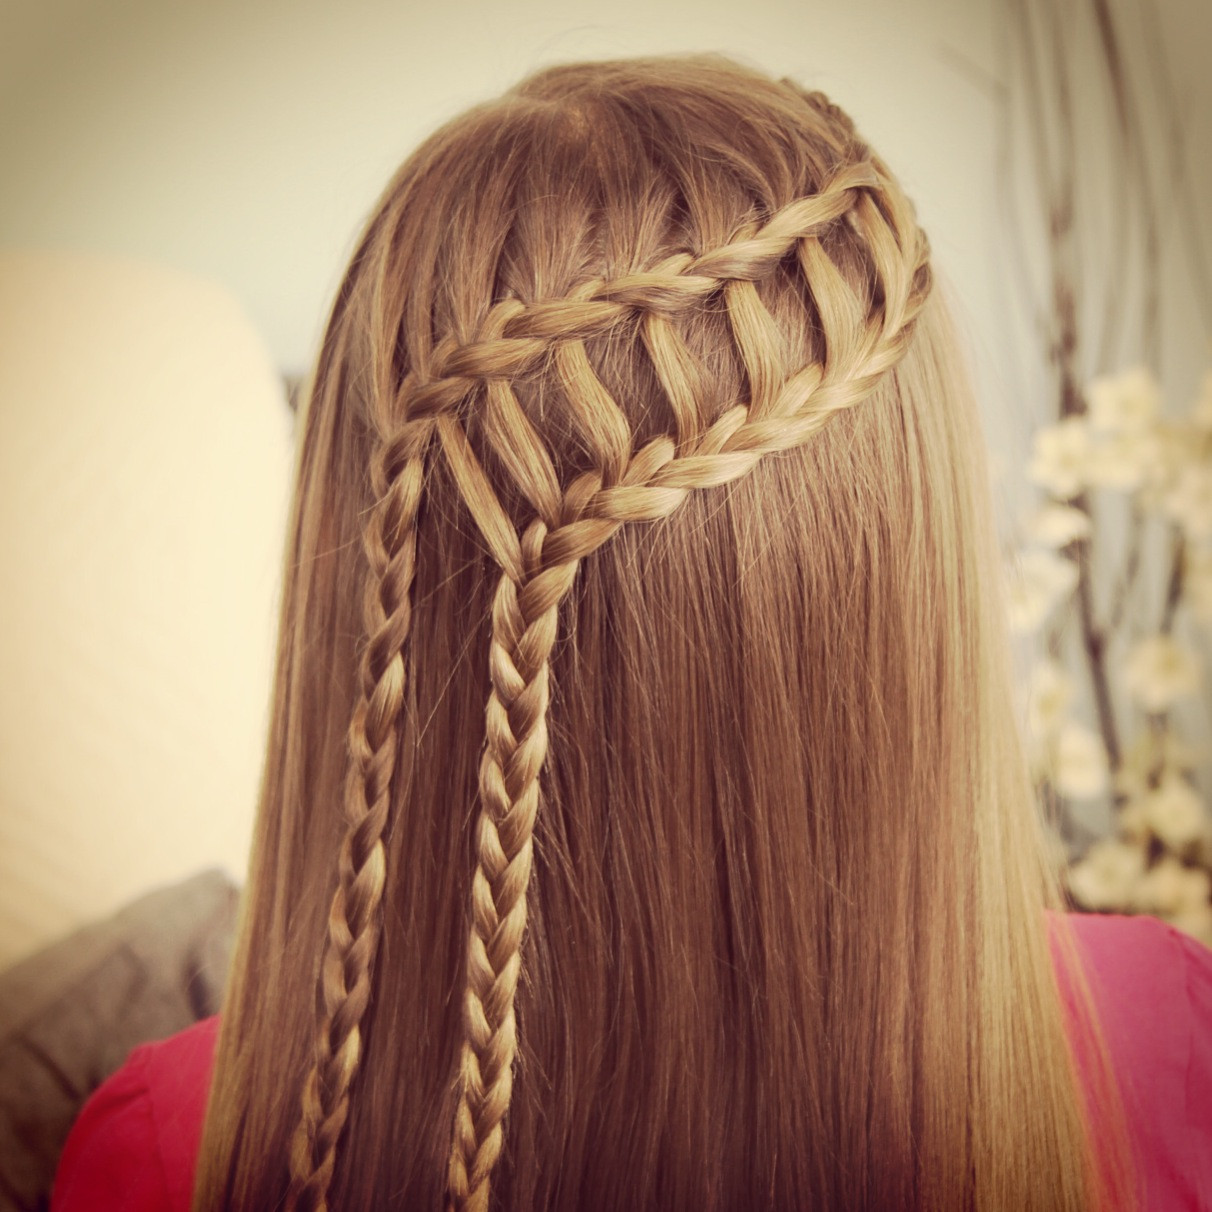 Pics Of Braided Hairstyles
 30 Cute Braided Hairstyles Style Arena